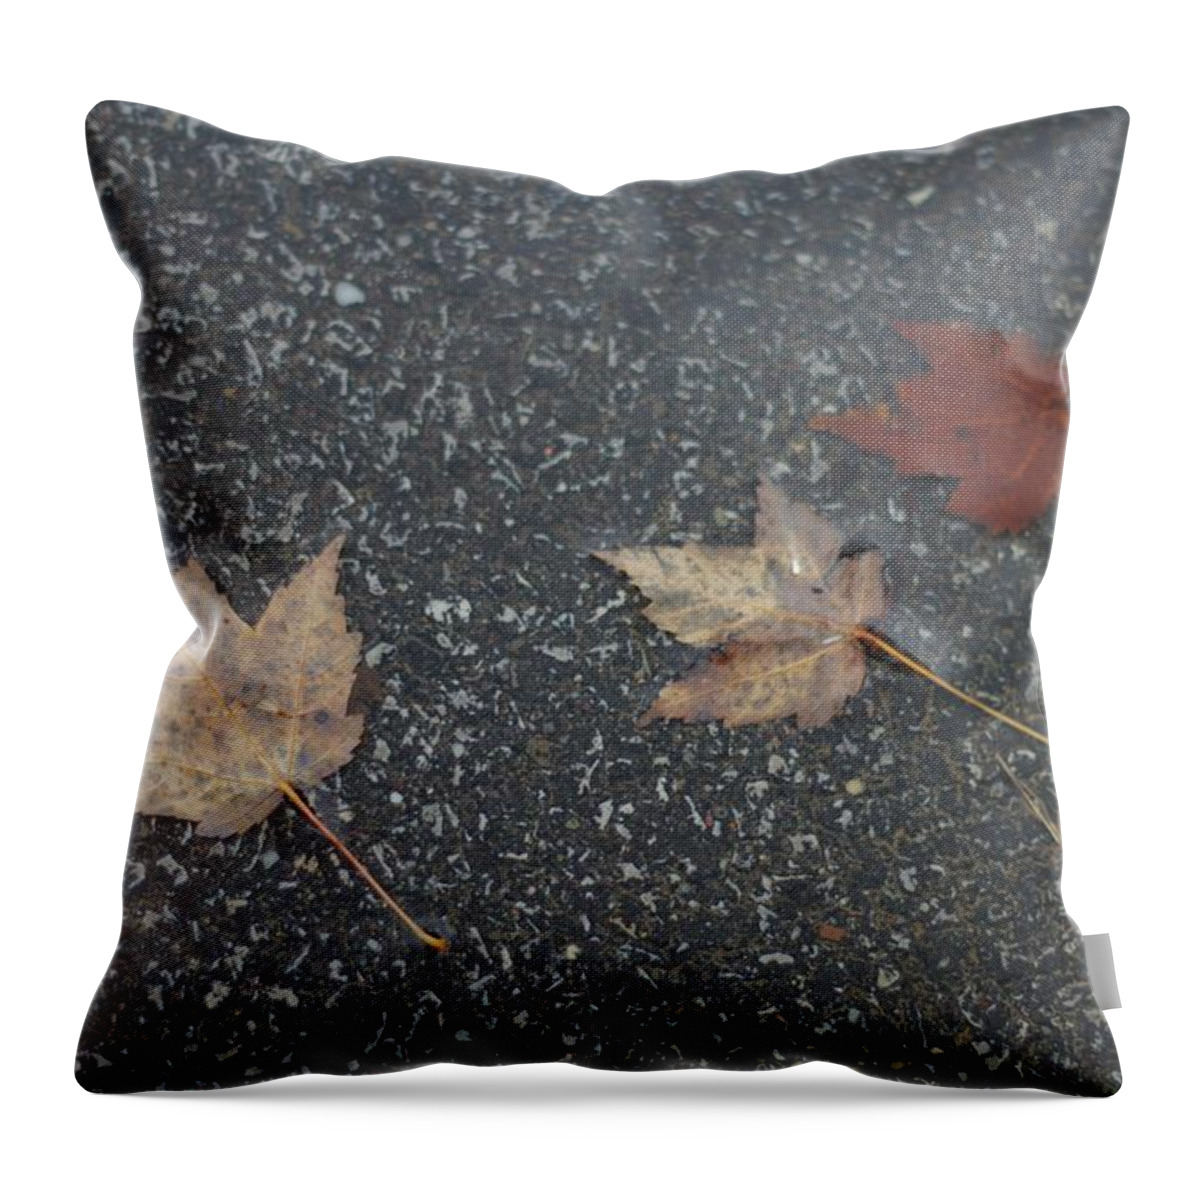 Leaves Throw Pillow featuring the photograph Wet Autumn Leaves in a Puddle by Valerie Collins